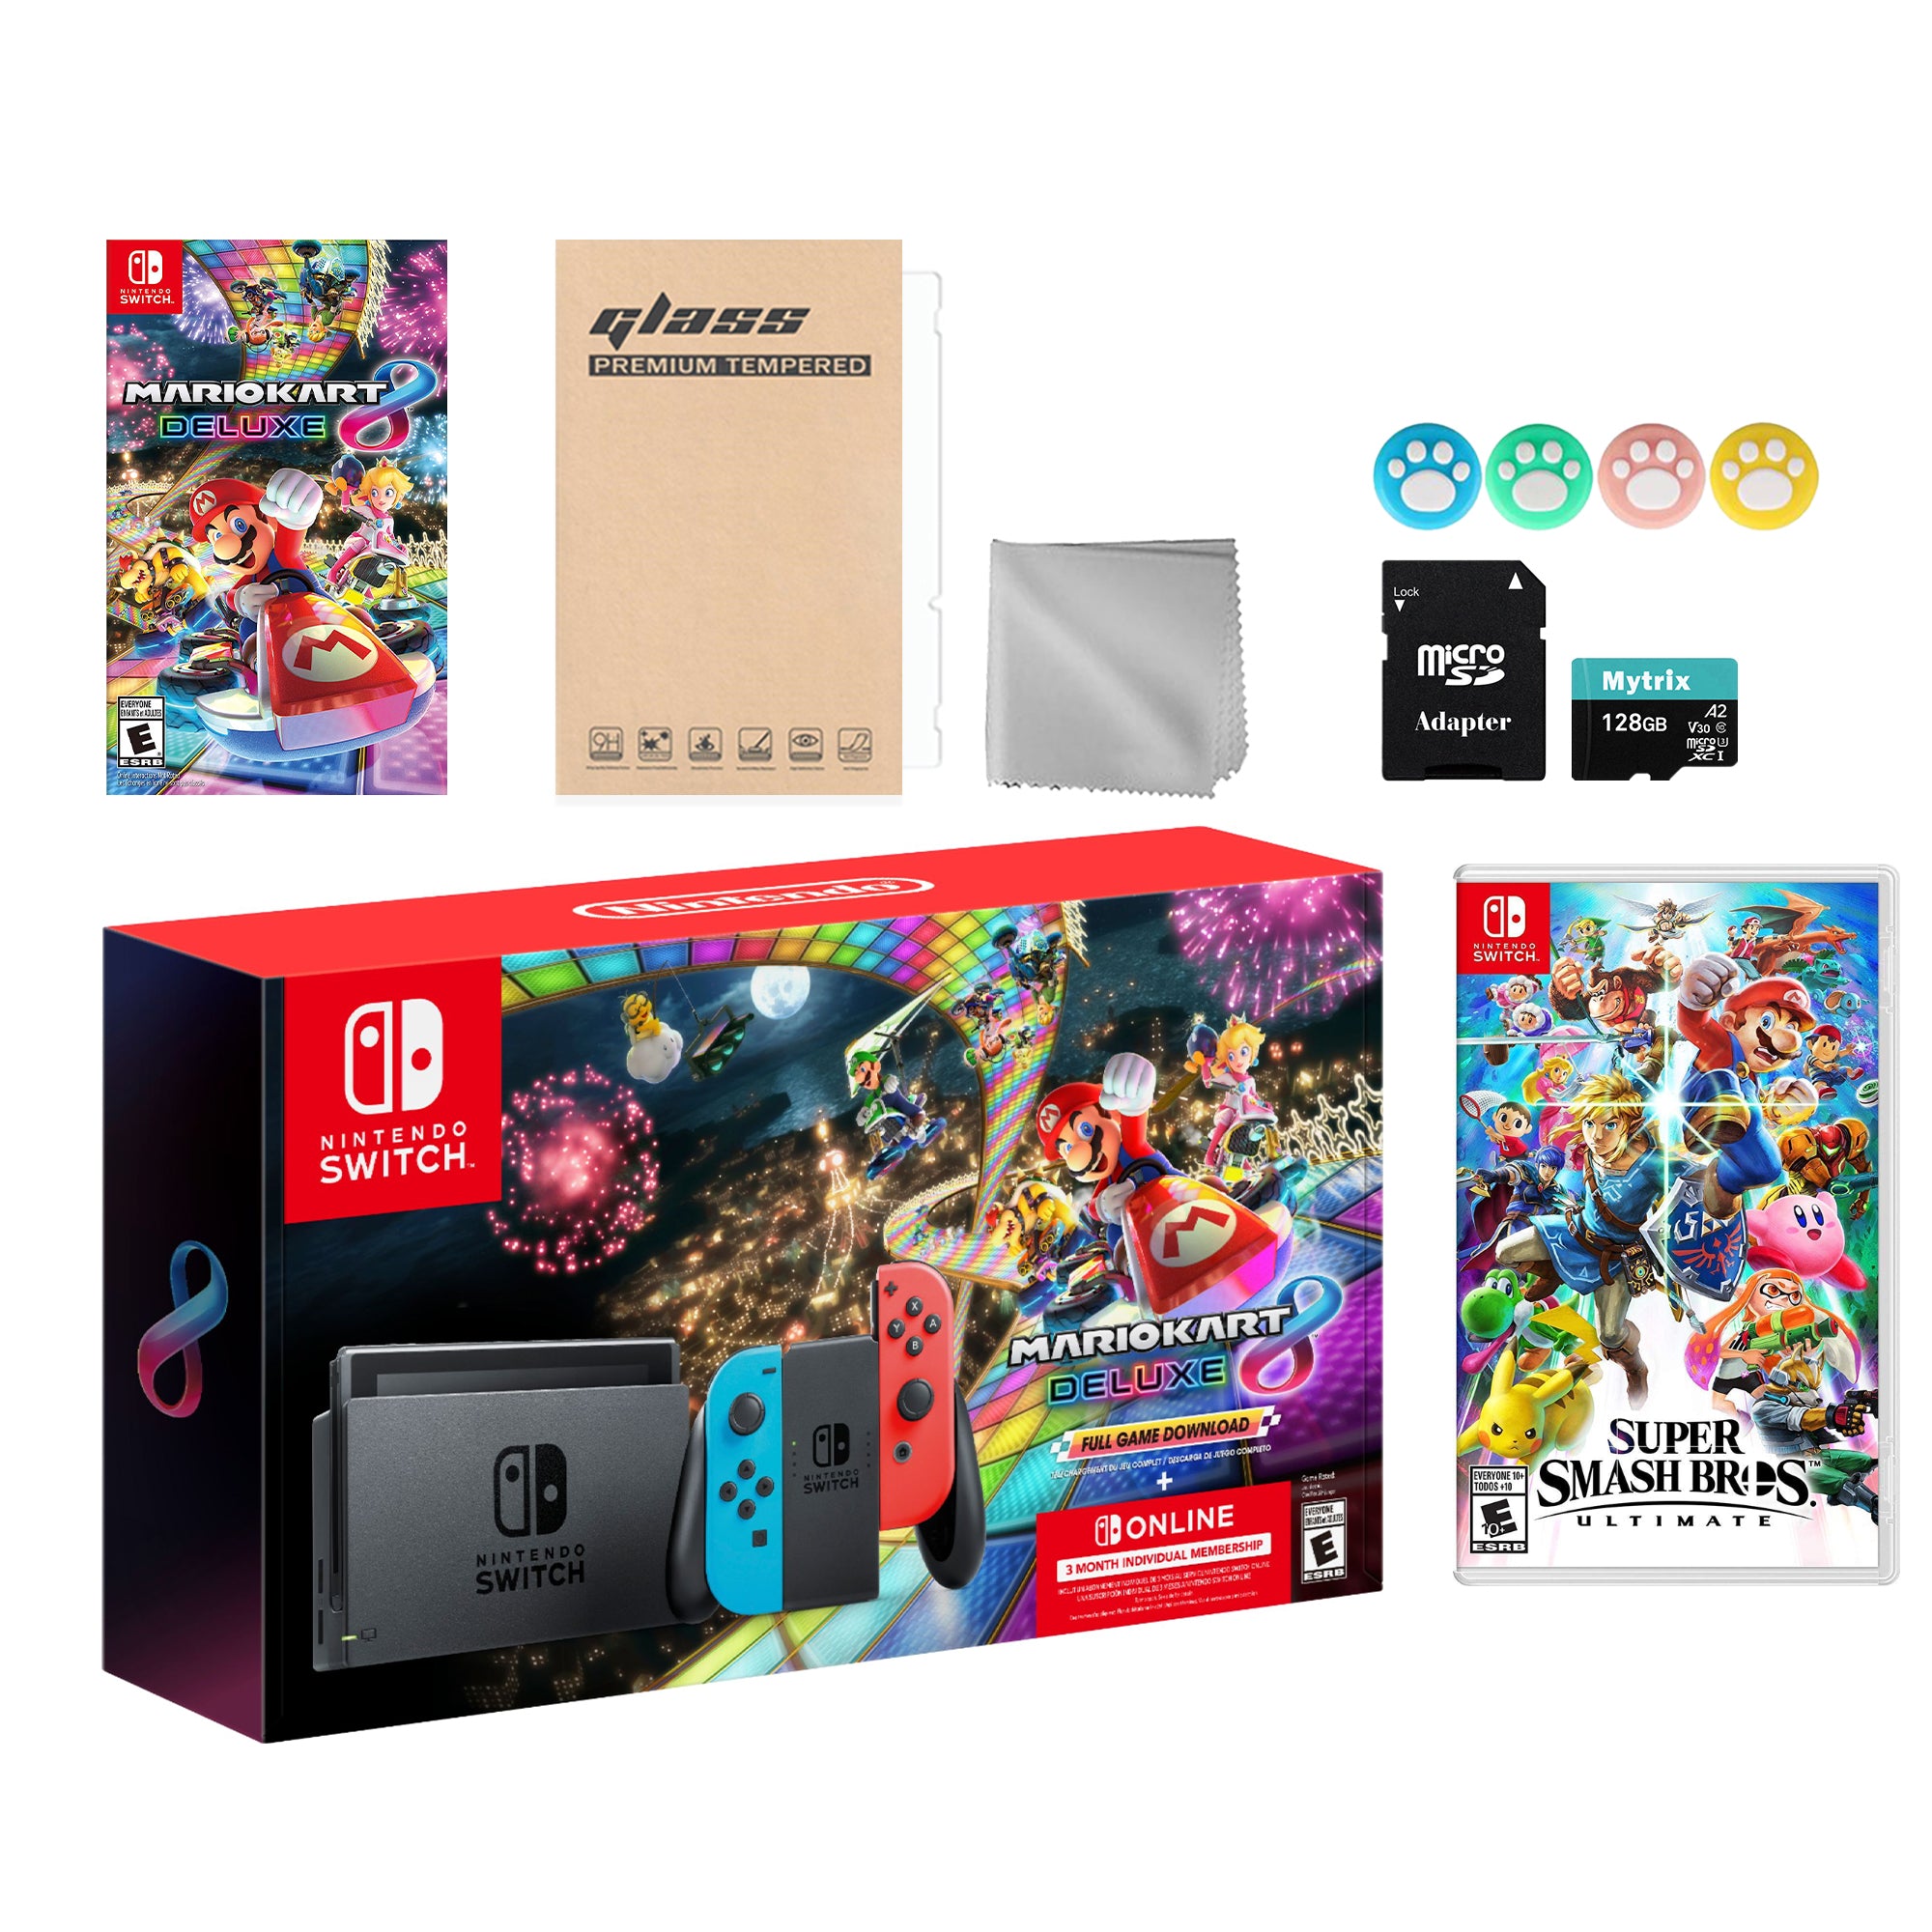 Nintendo Switch Mario Kart 8 Deluxe Bundle: Red Blue Console, Mario Kart 8 & Membership, Super Smash Bros. Ultimate, Mytrix 128GB MicroSD Card and Accessories